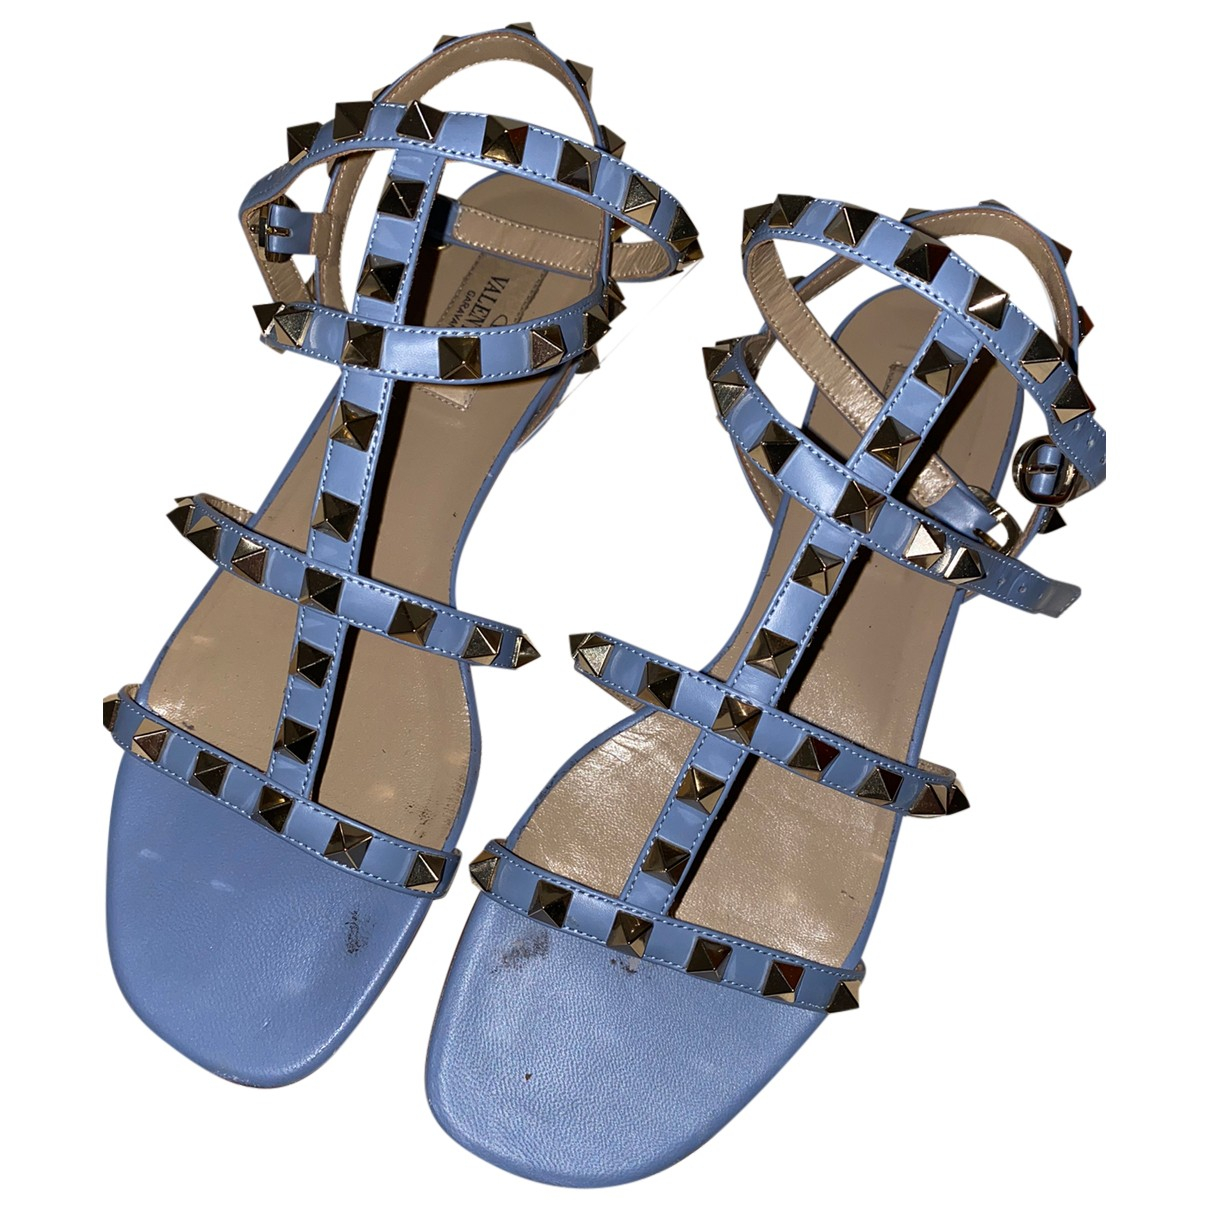 Rockstud leather Max 71% OFF sandals OFFicial shop